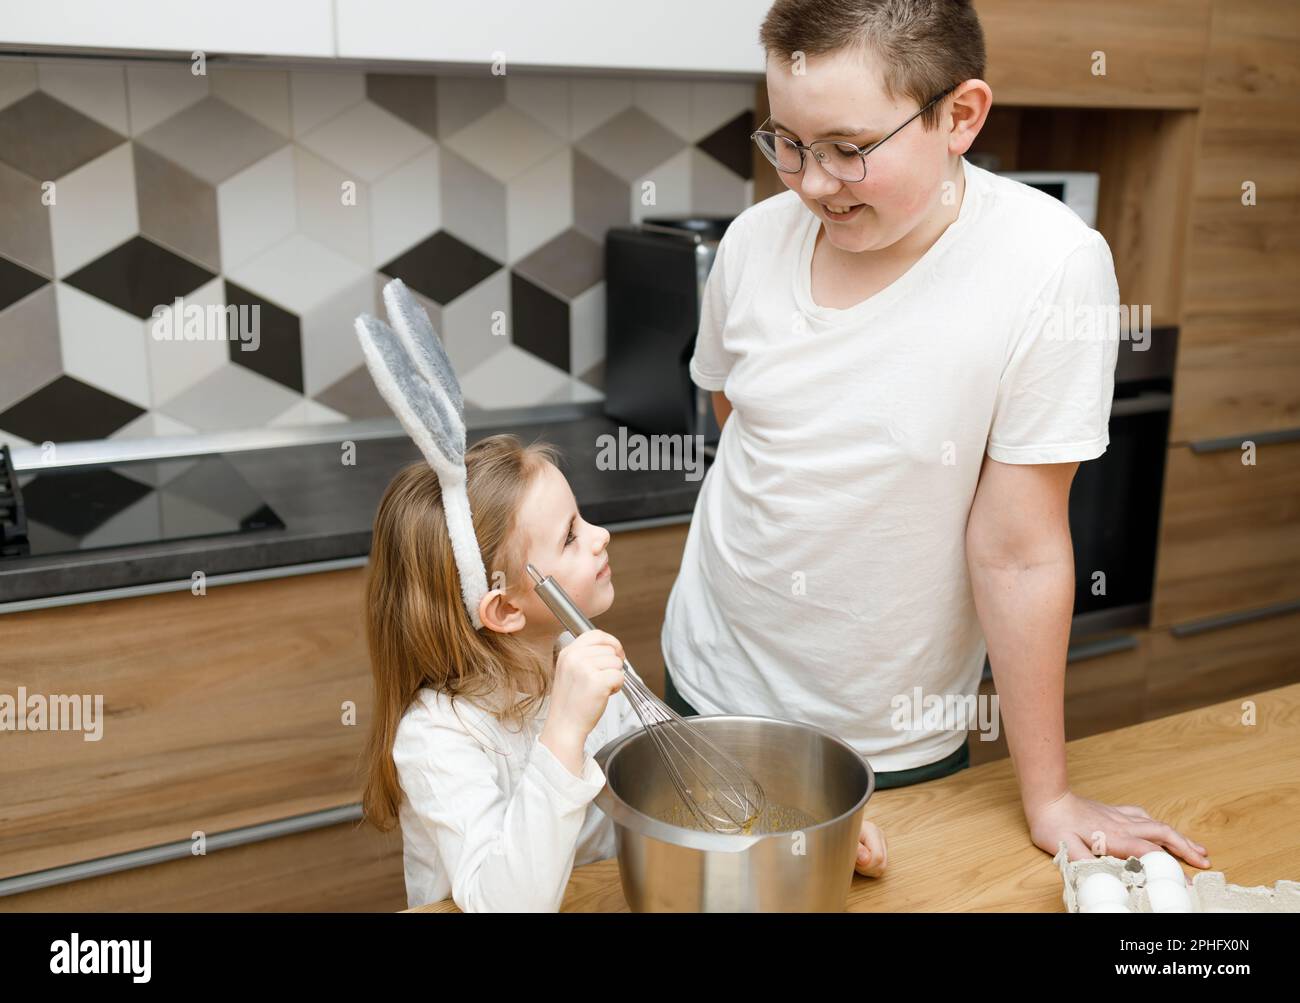 Brother in eyeglasses and his little sister in kitchen smiling and looking at each other while cooking. Child mixing dough in bunny ears. Helping, fam Stock Photo